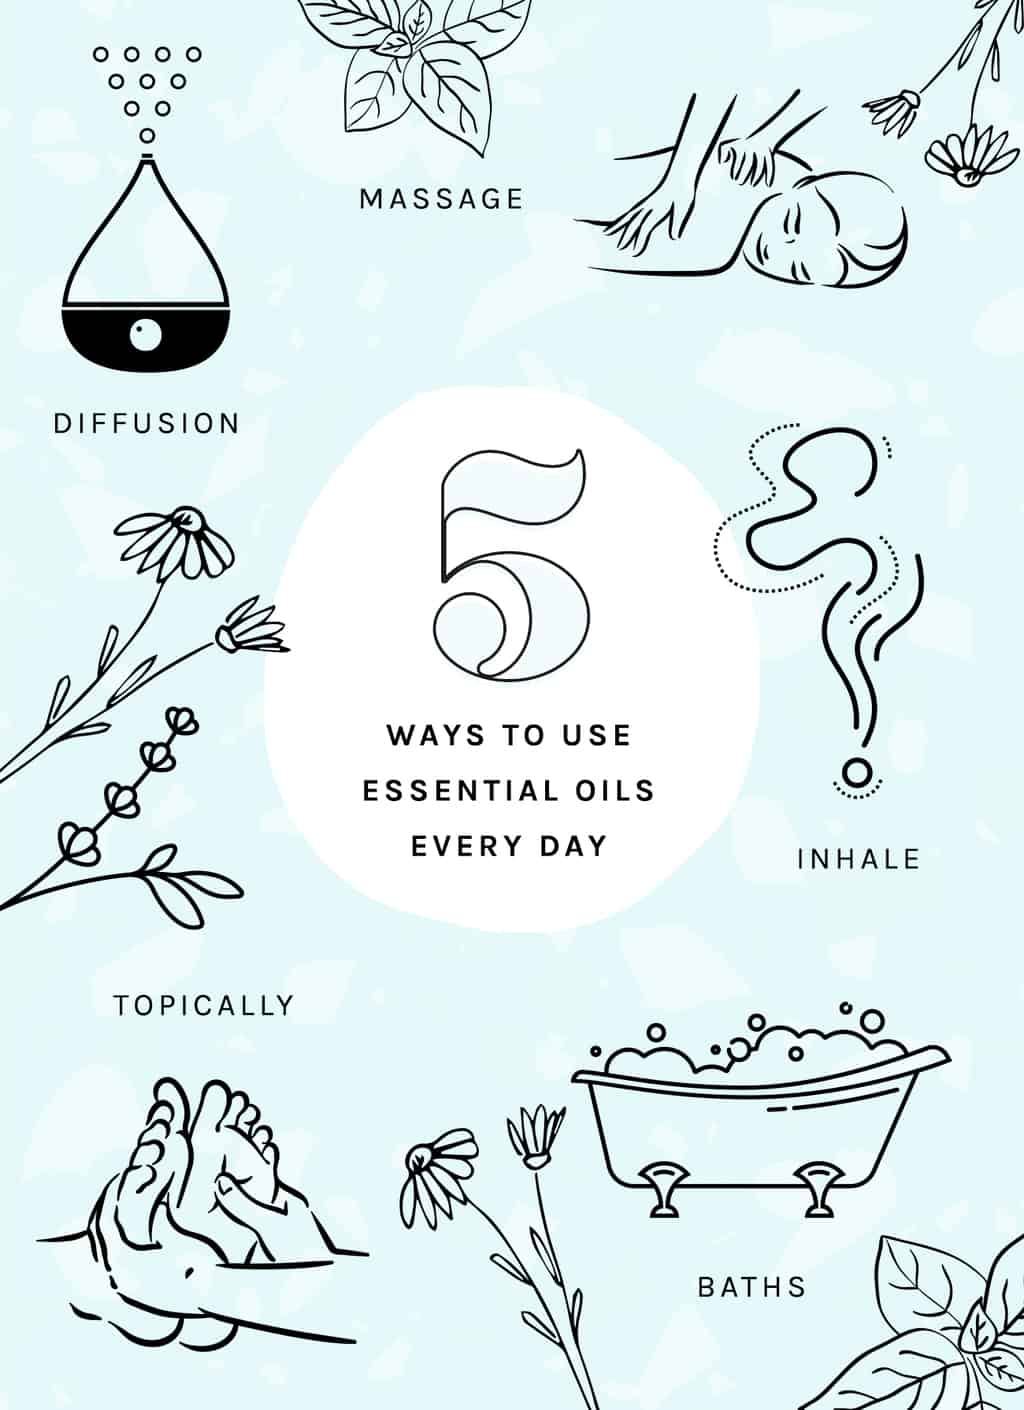 How to Make Essential Oils: 5 Complete Methods